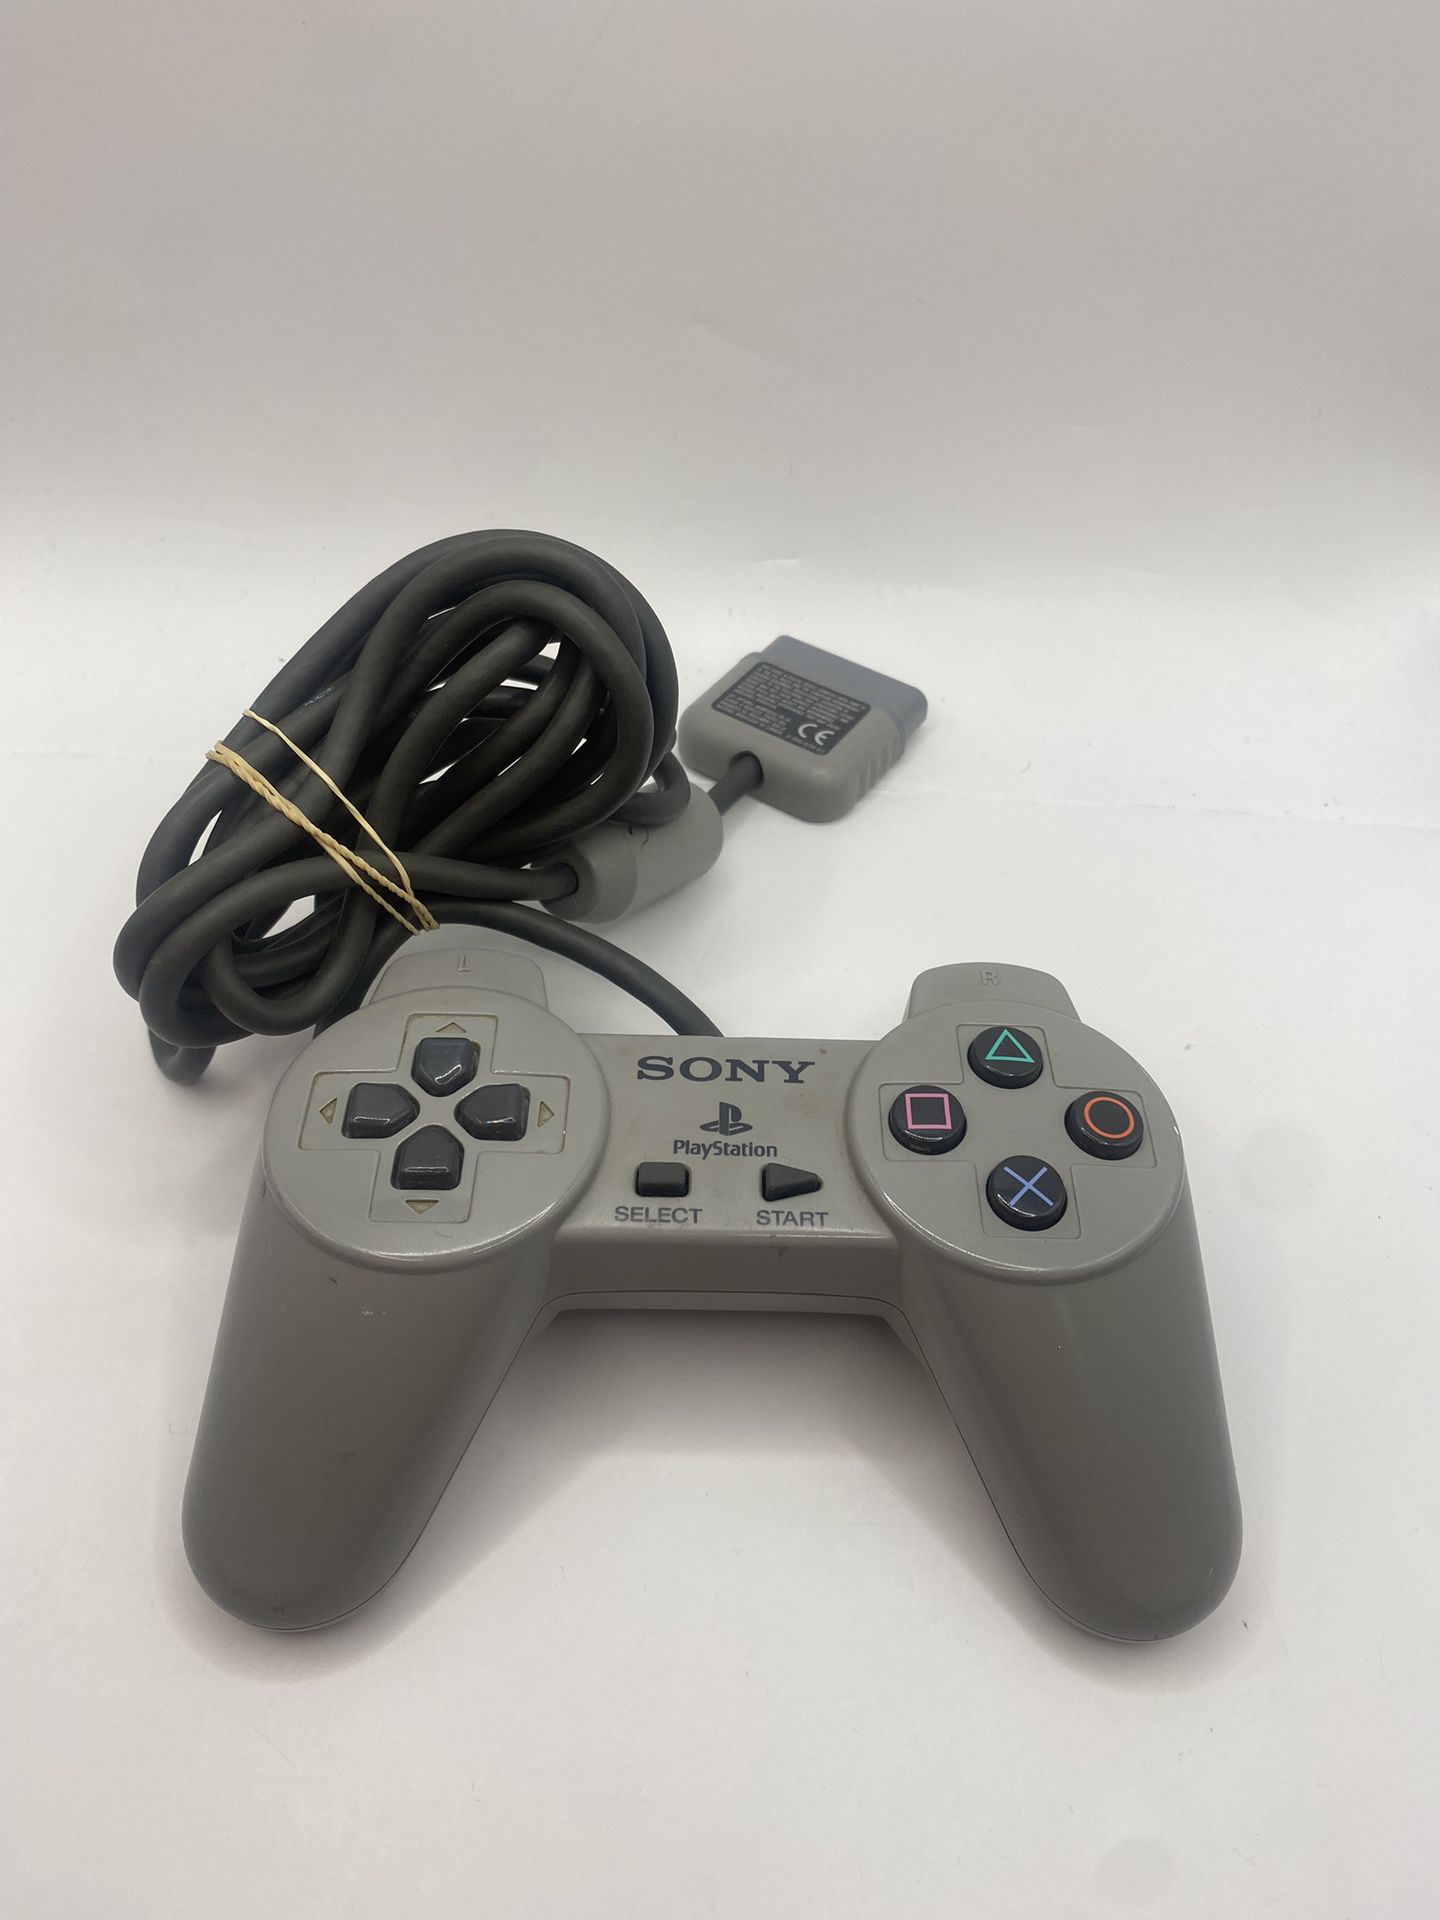 Sony PlayStation 1 (PS1) SCPH-1080 Wired Controller - Gray Tested Authentic 